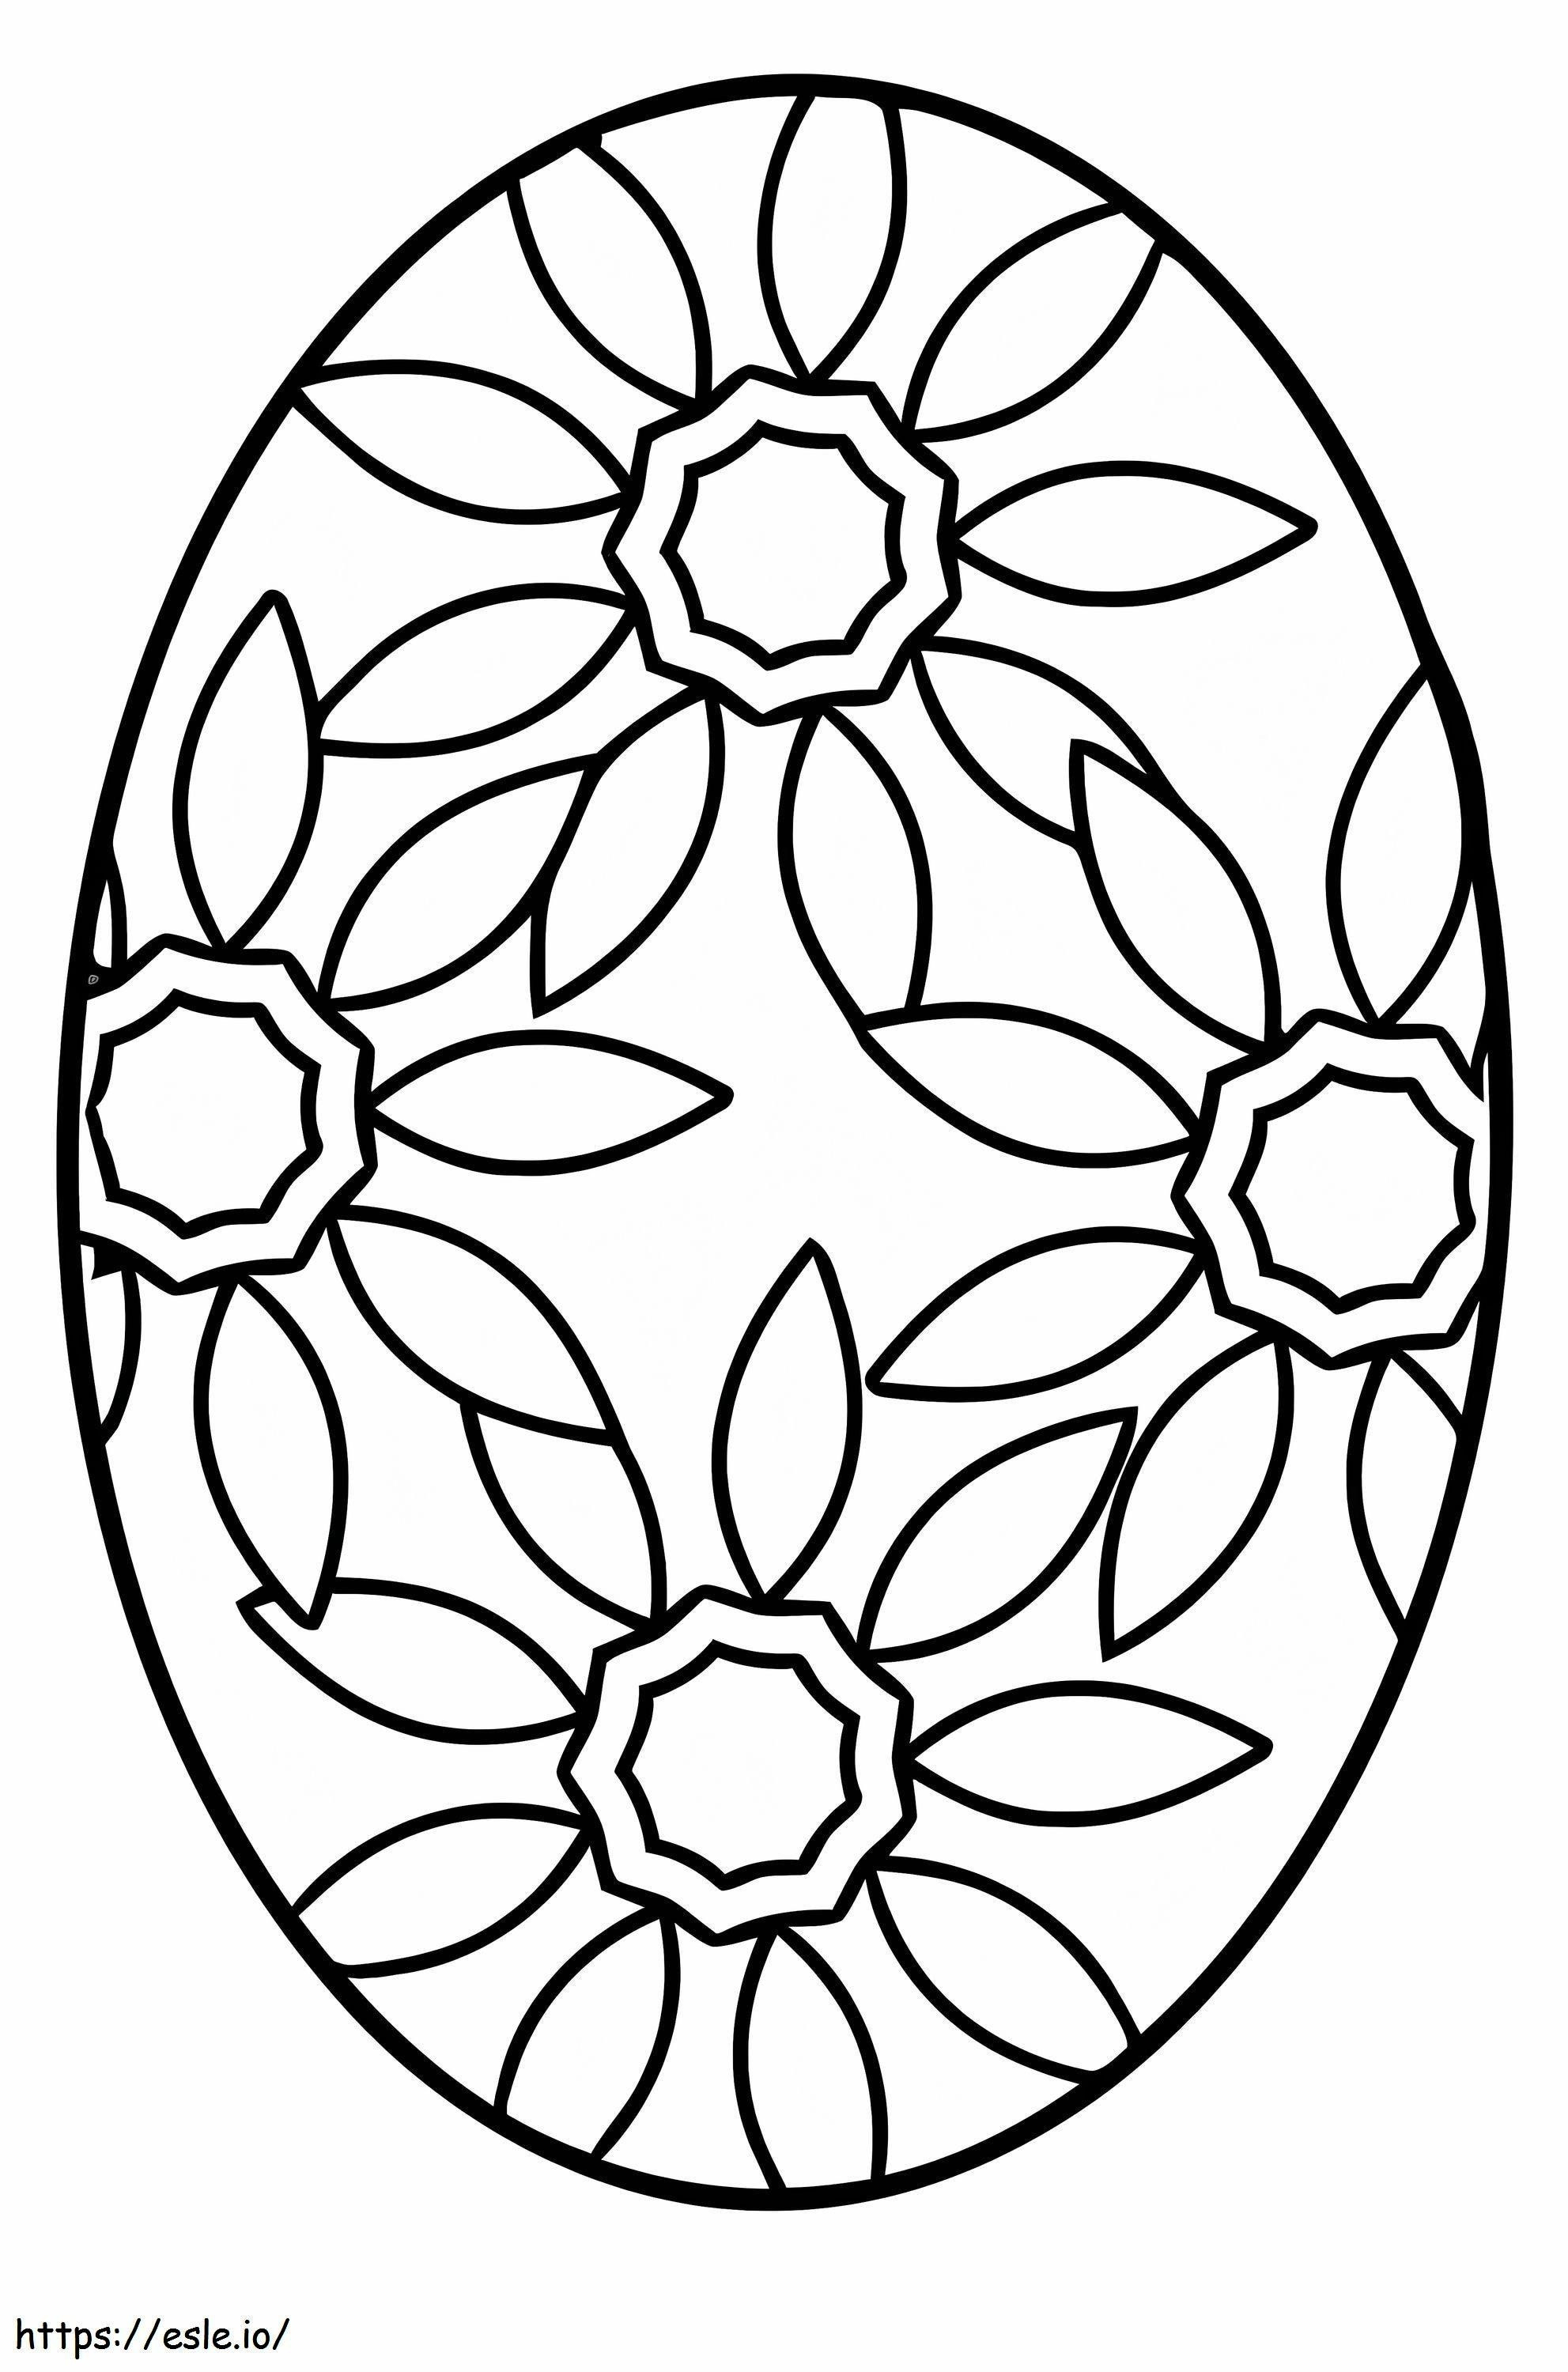 Four Eggs coloring page